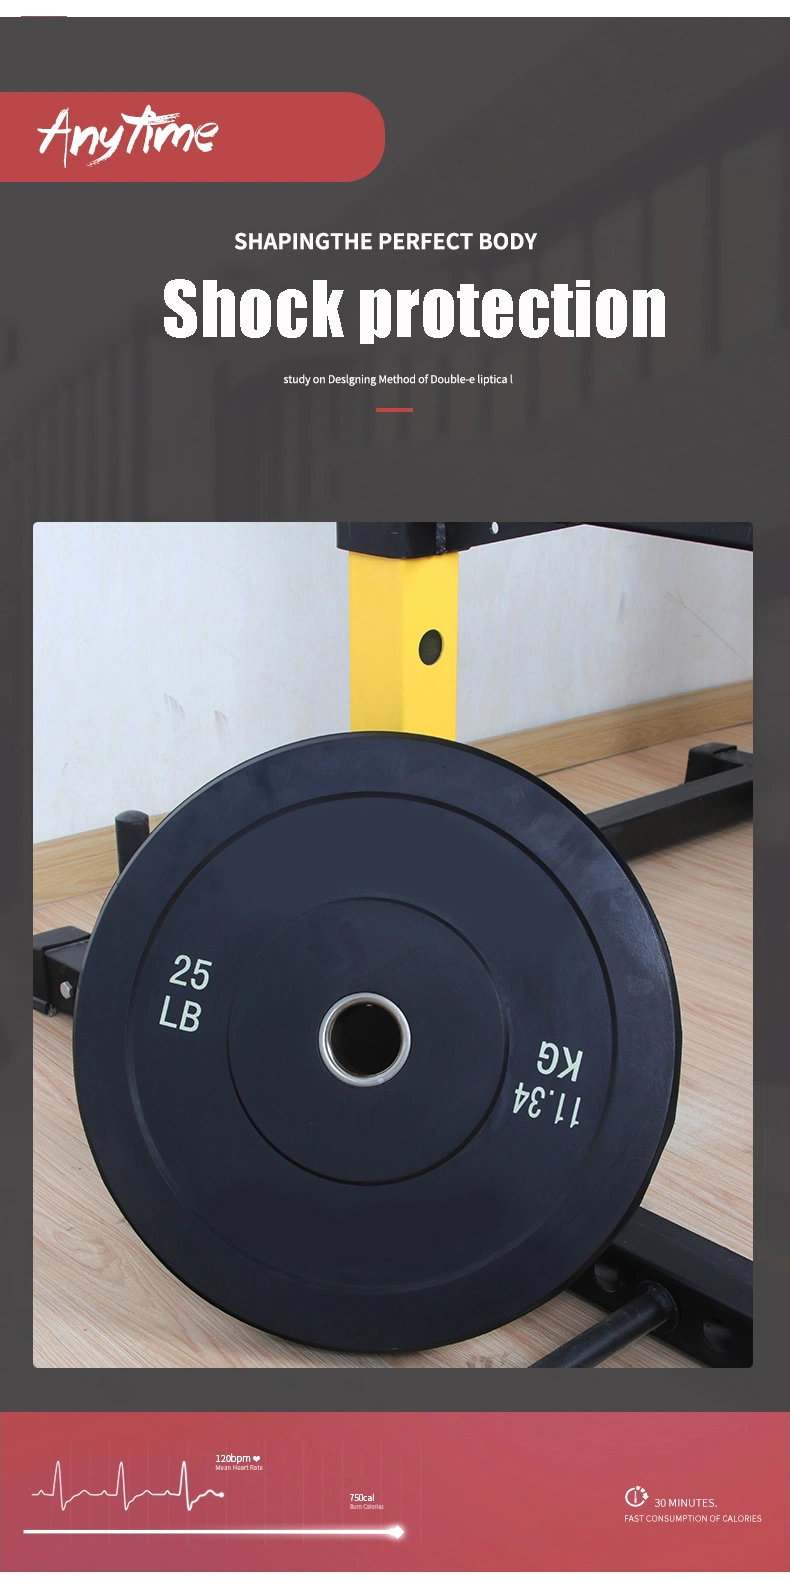 Hot Sale Gym Fitness Weight Lifting Plate Weight Lifting Bumper Plates Barbell Weight Plate